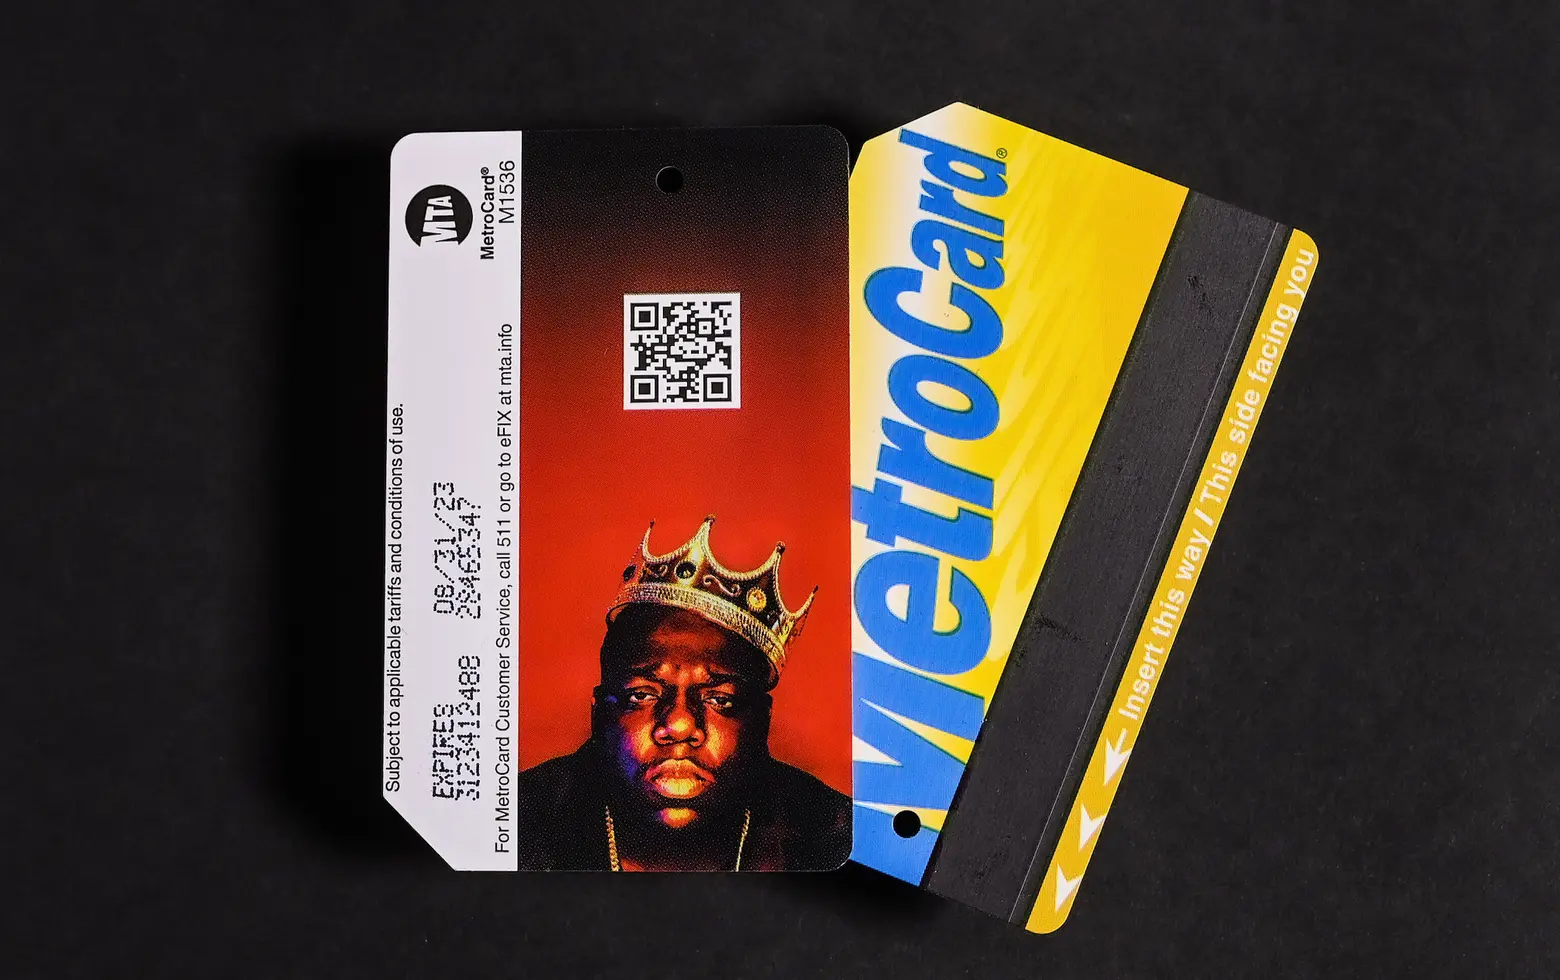 NYC to celebrate Biggie Smalls’ 50th birthday with Empire State Building tribute, special MetroCards